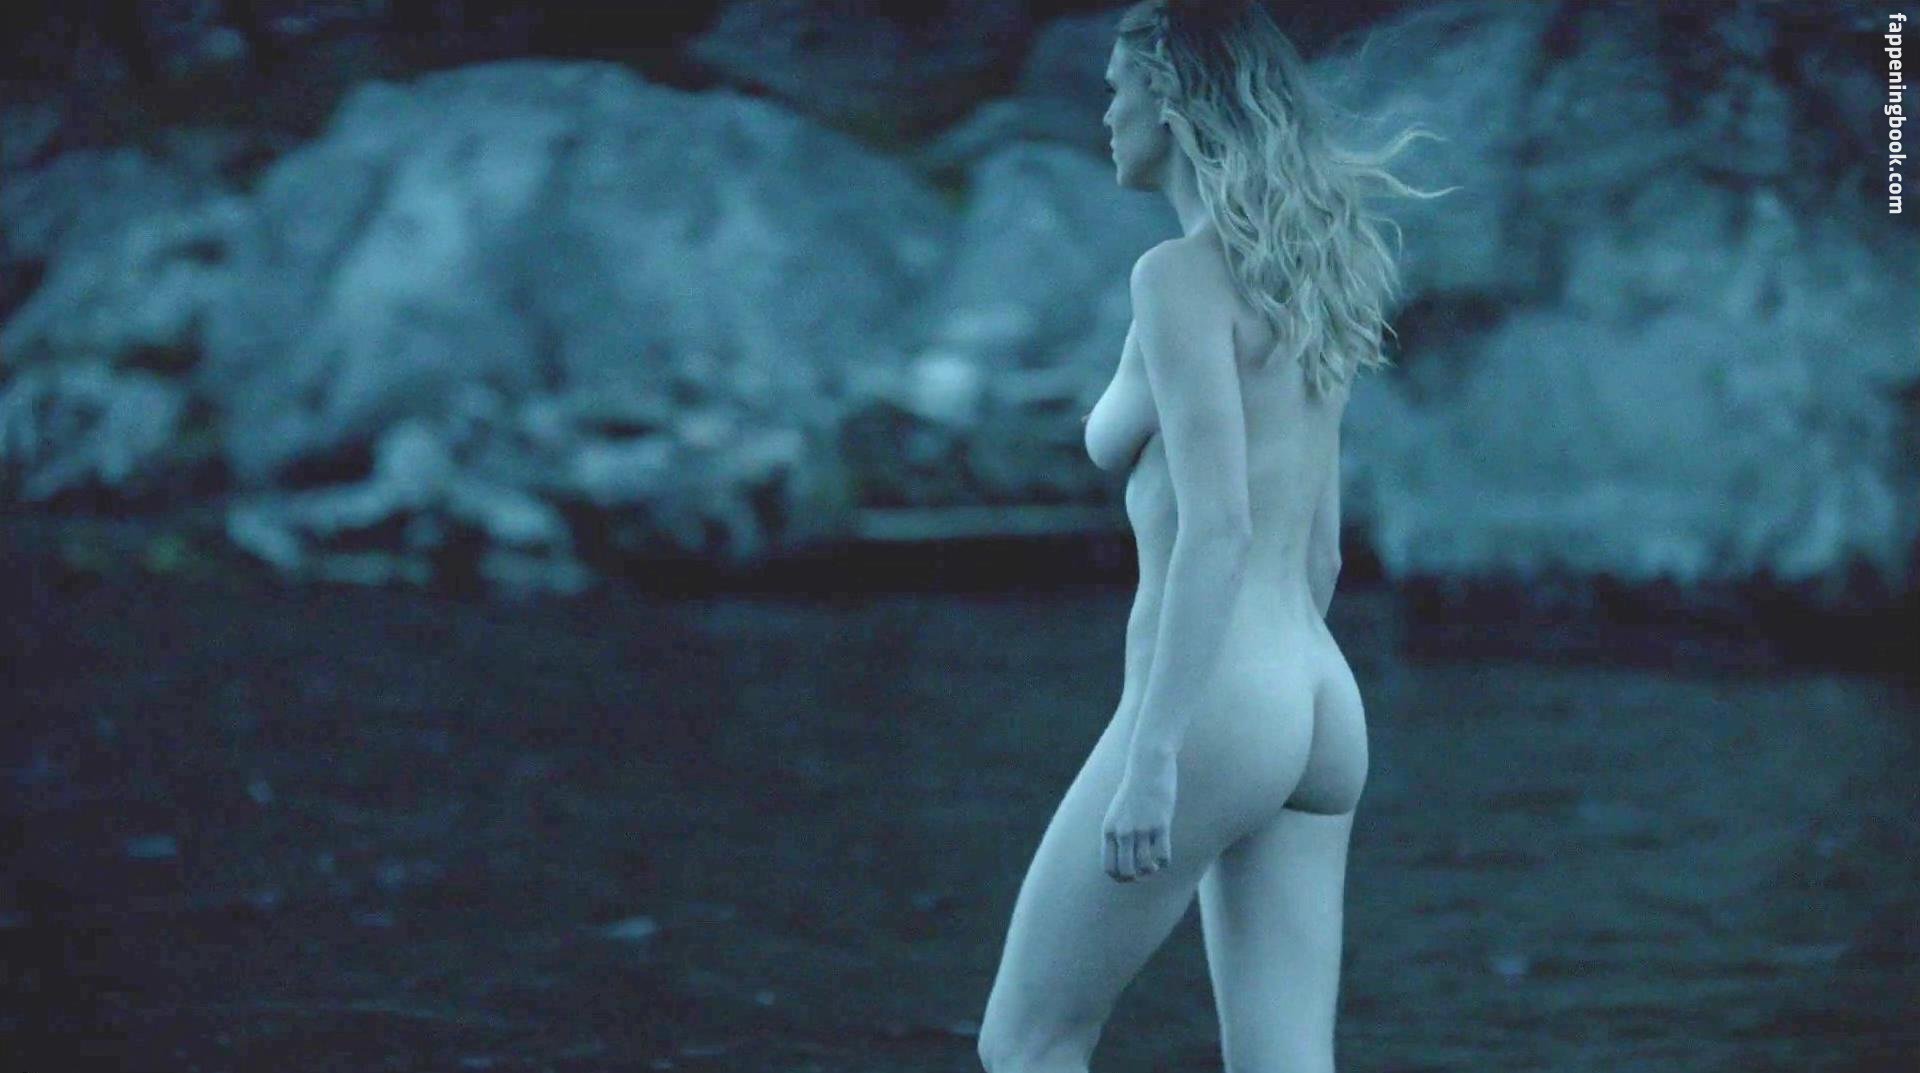 Gaia Weiss Nude, The Fappening - Photo #194682 - FappeningBook 